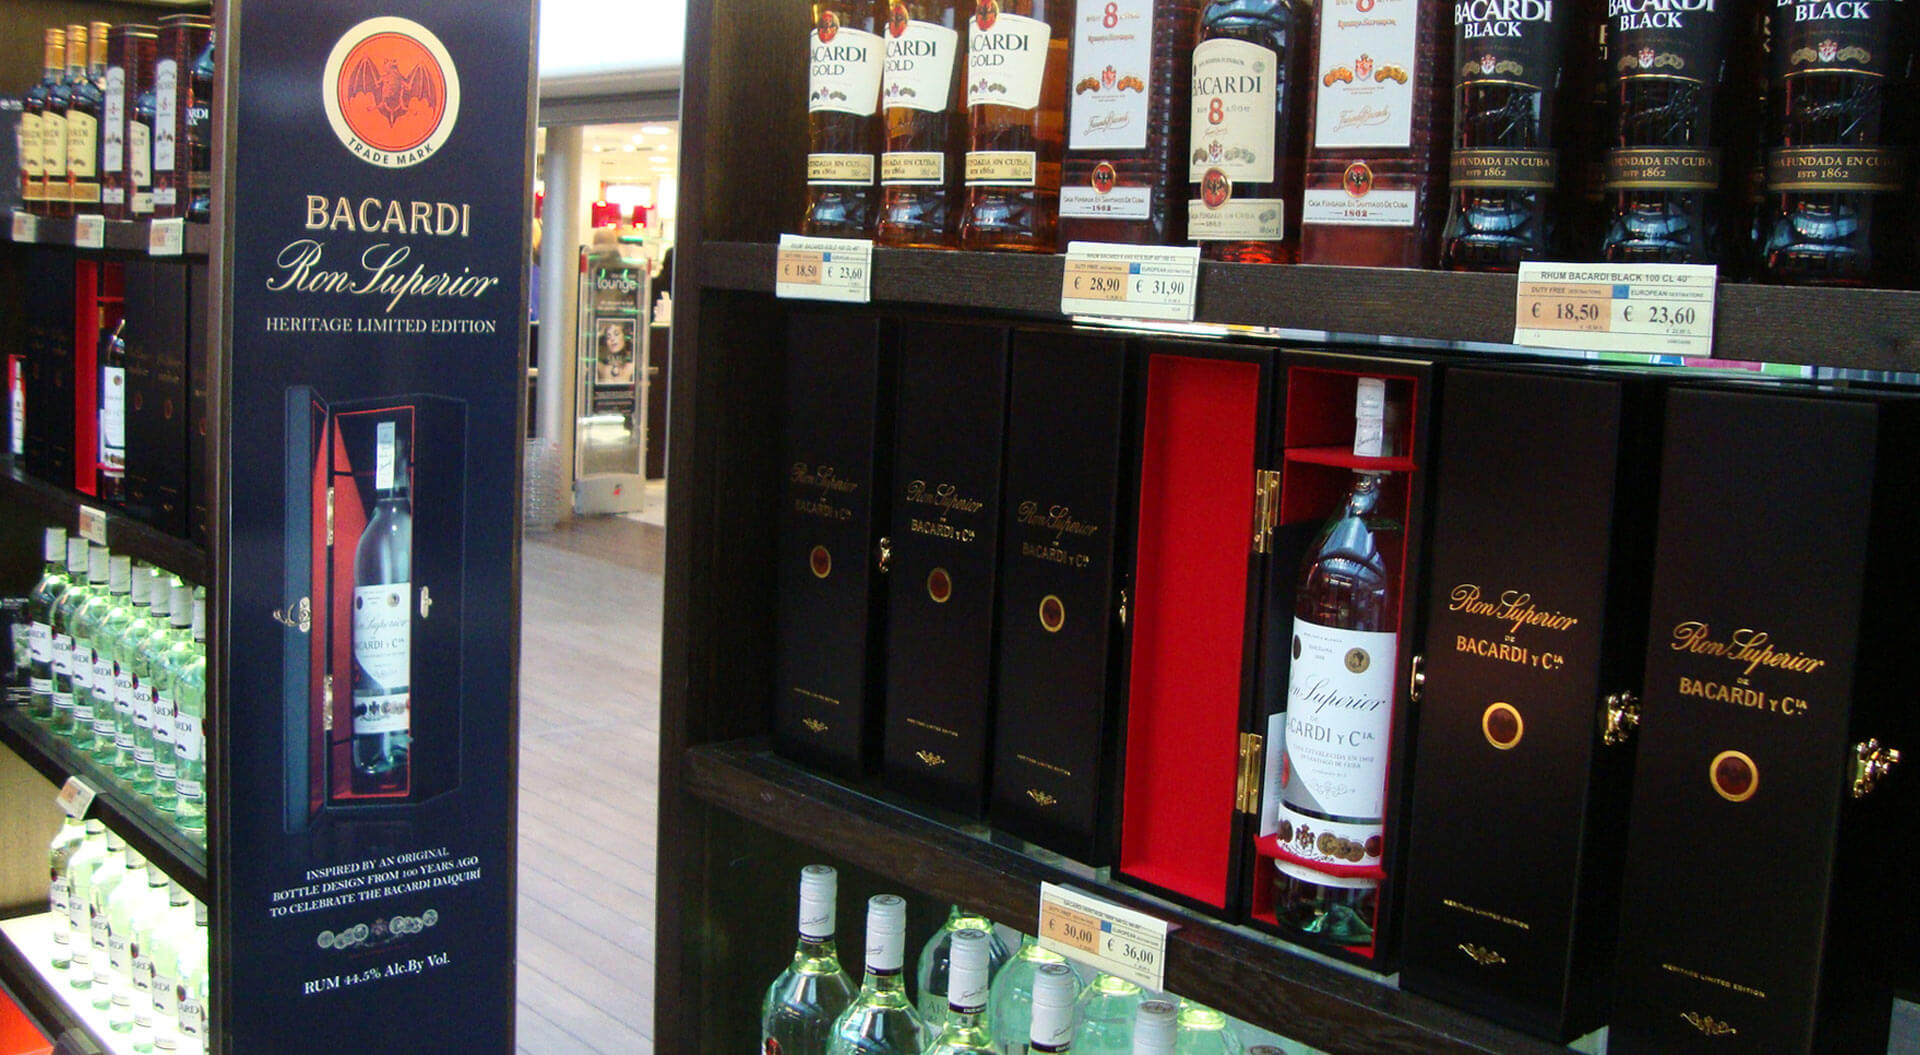 Bacardi Heritage Ron Superior Limited Edition entrance graphics store design at Charles de Gualle Airport